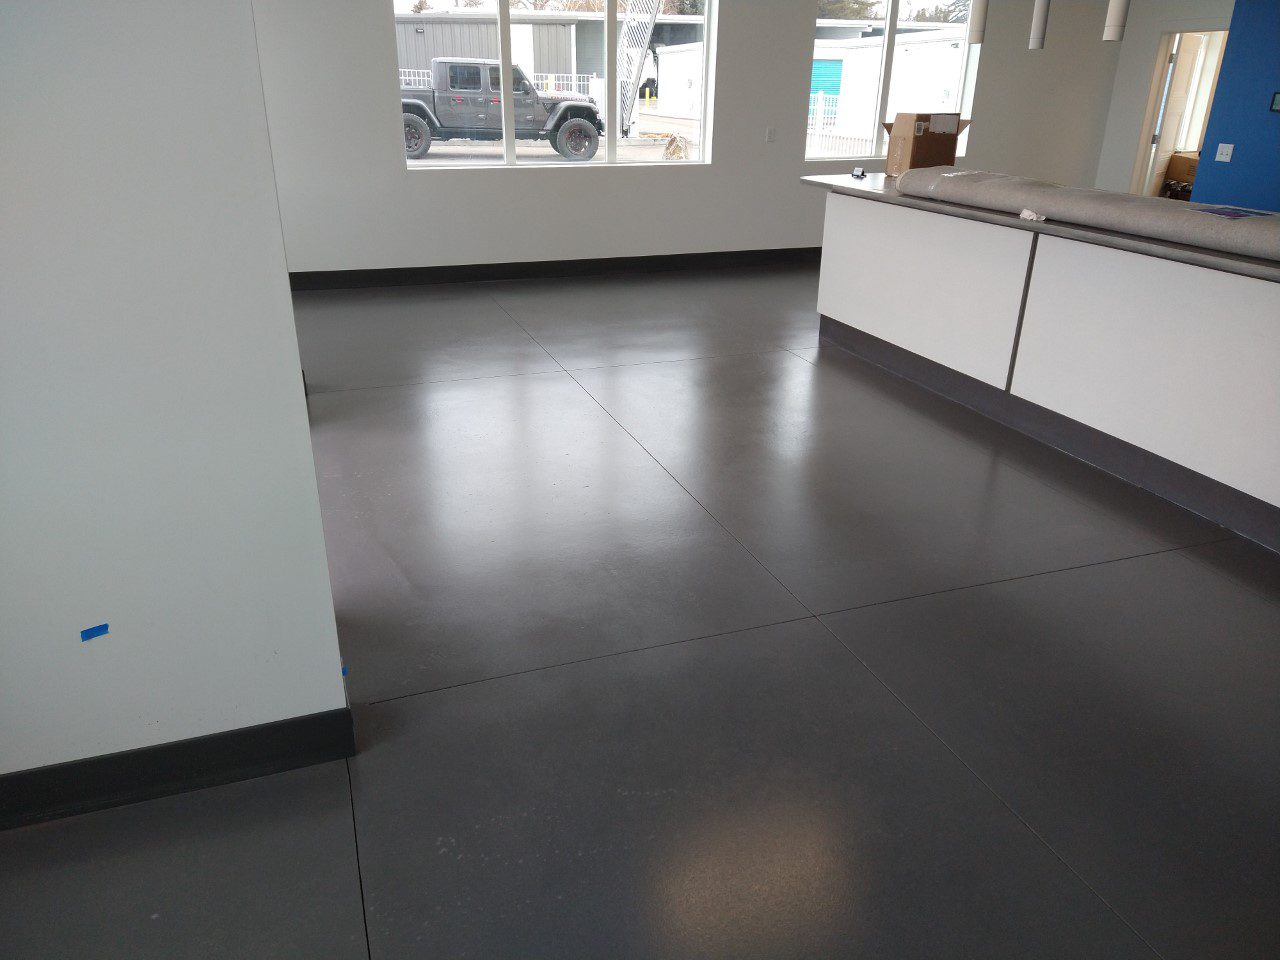 Commercial concrete floor transformed by Silver Gray AcquaTint